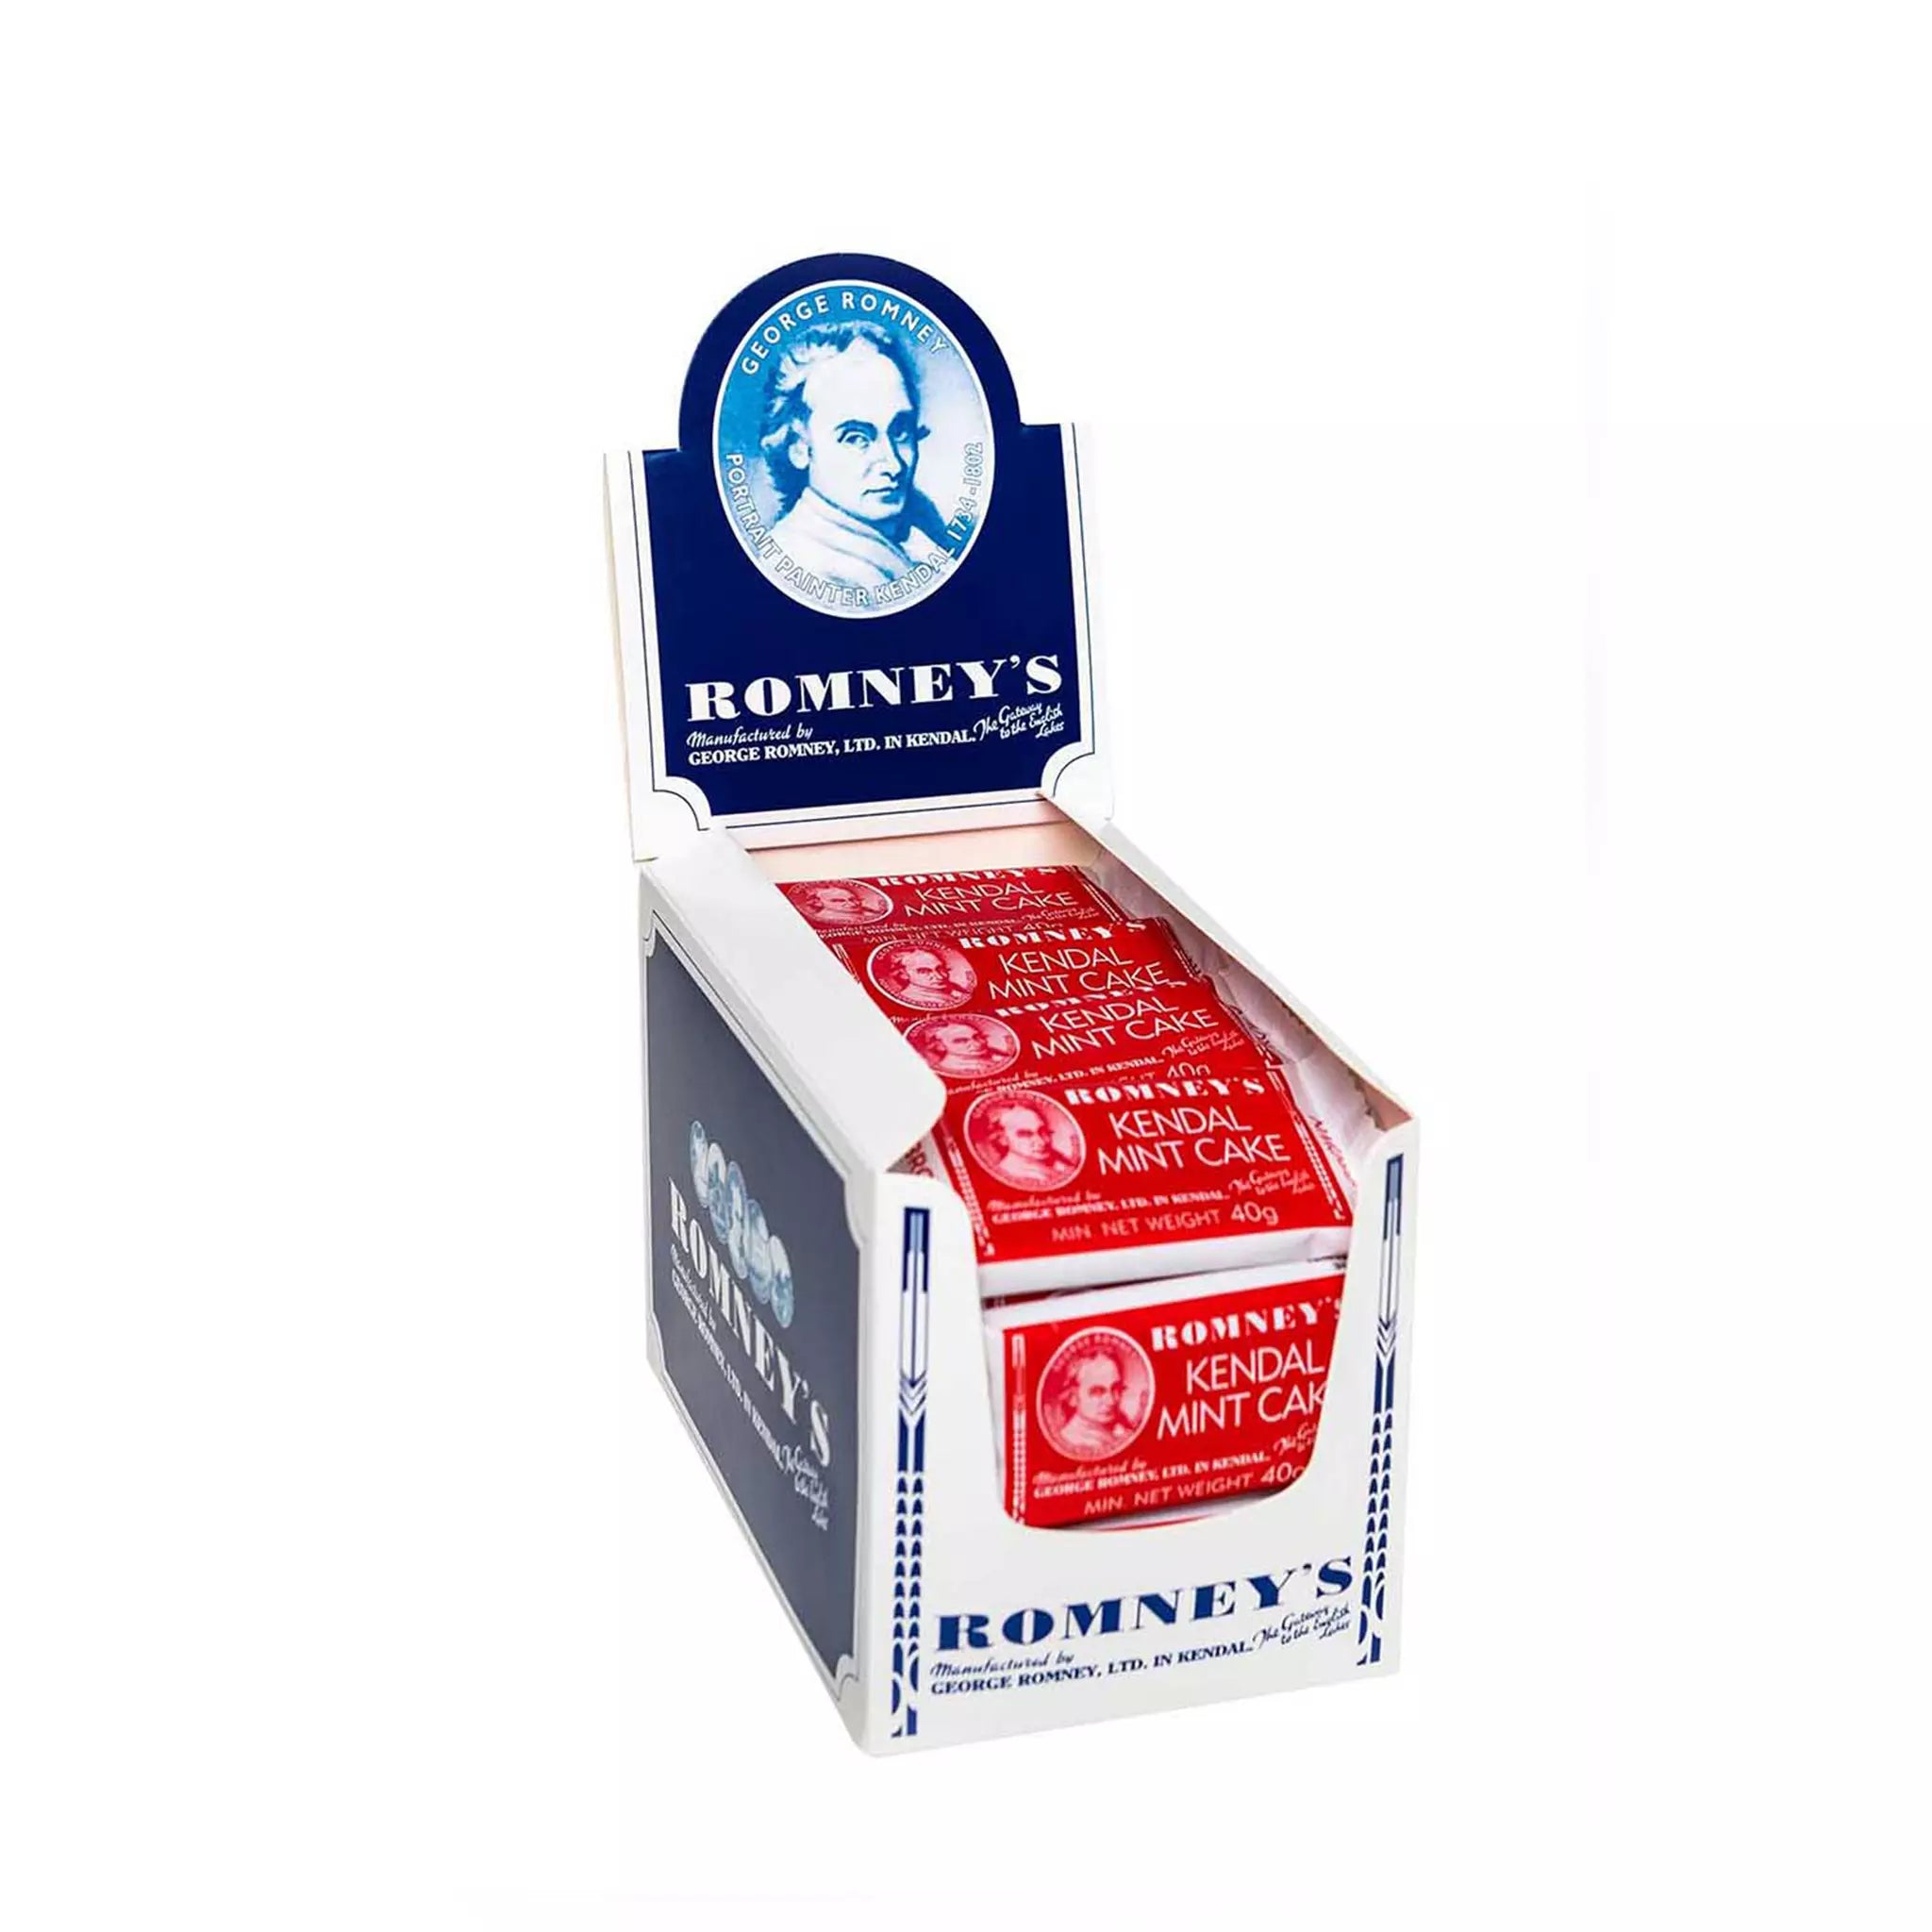 A product image showing an open cardboard box which is used to display products on a shelf and is white and blue. The box contains 40g bars of Romney's Brown Kendal Mint Cake which is in a red and white wrapper.